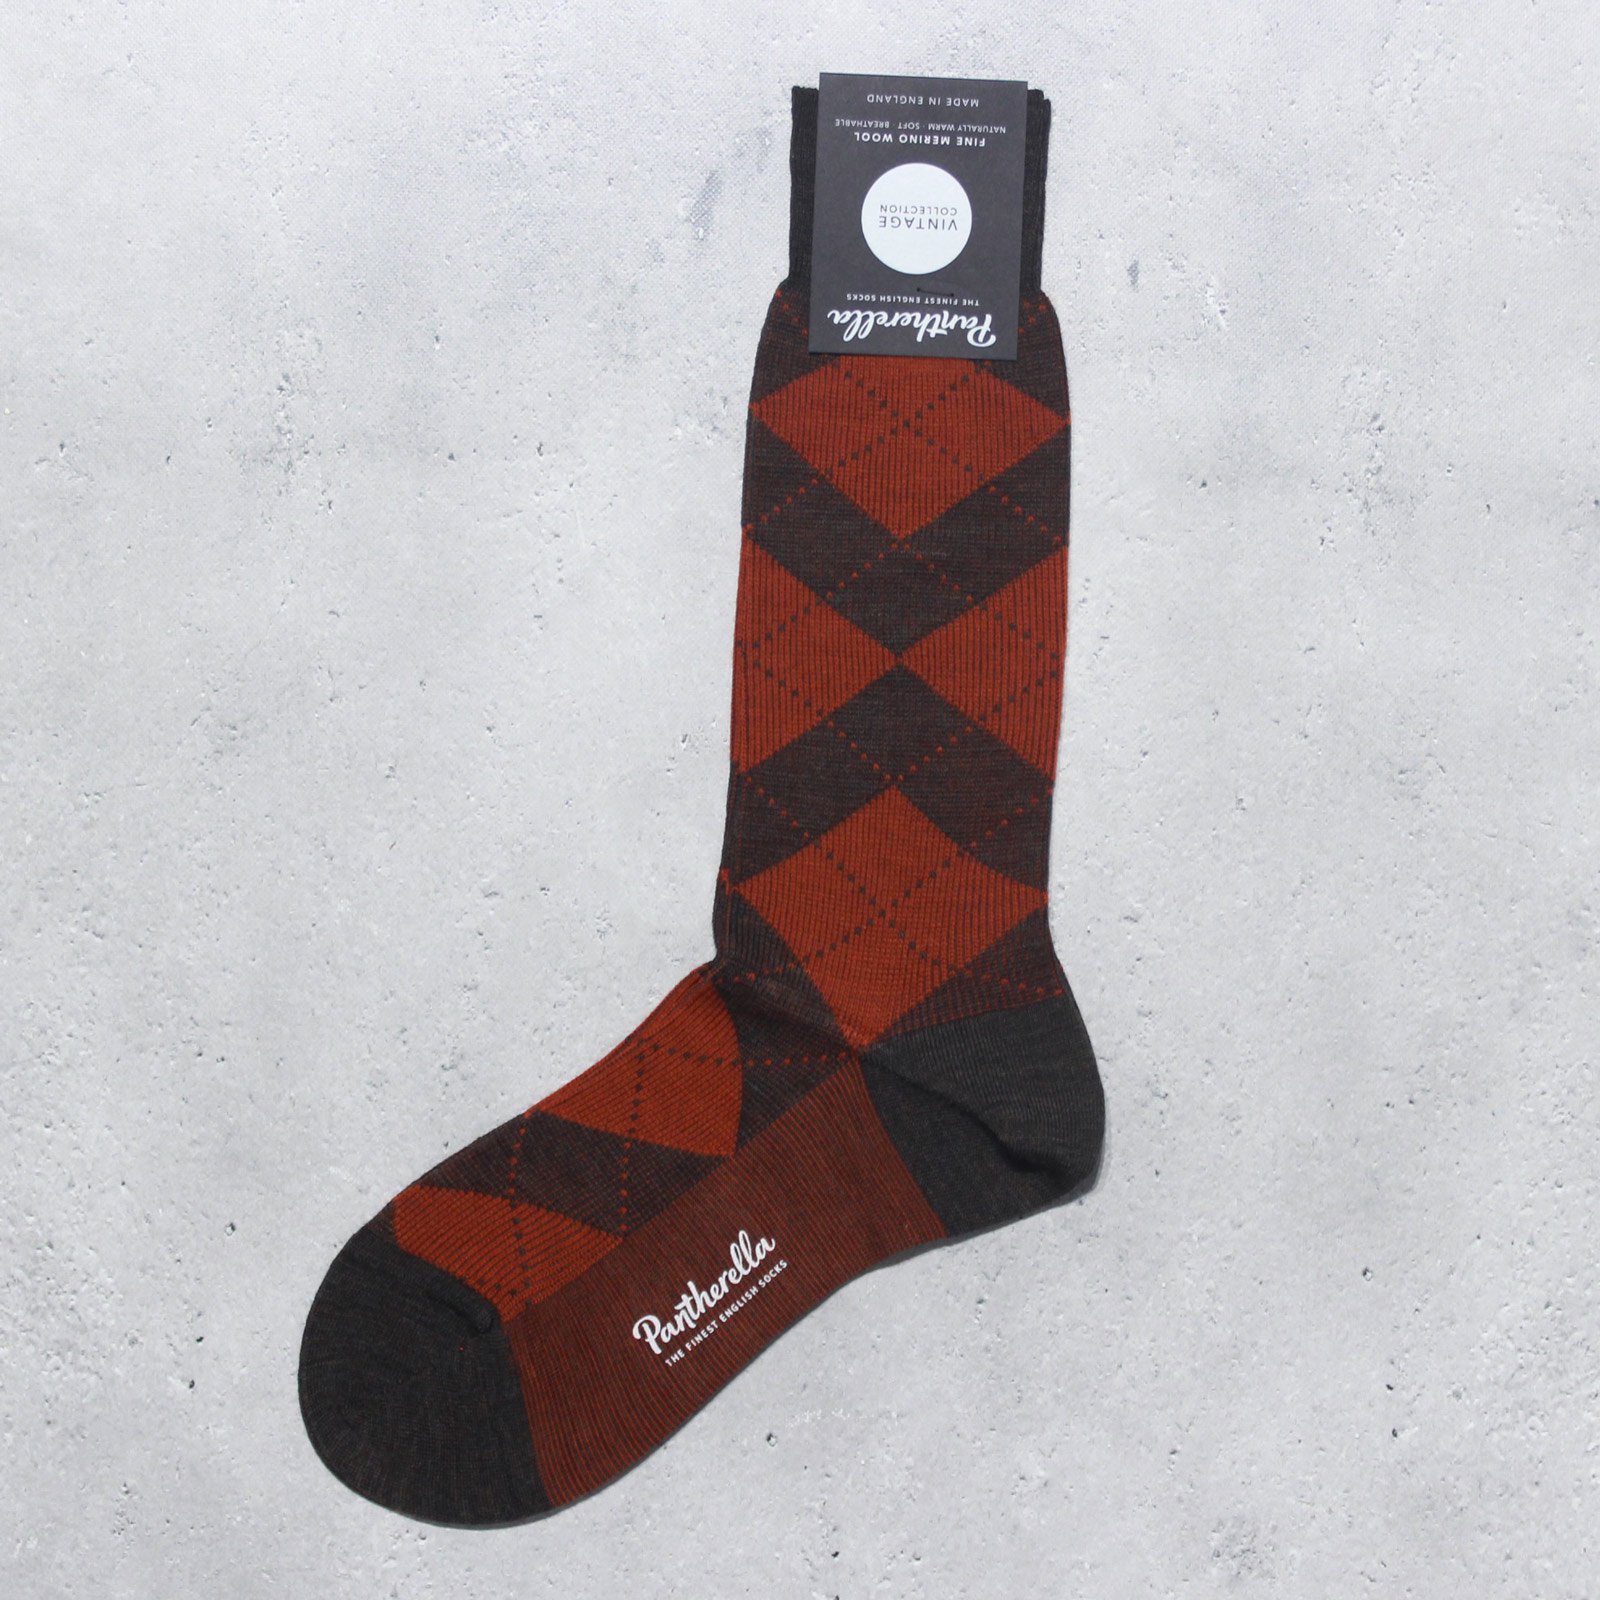 <img class='new_mark_img1' src='https://img.shop-pro.jp/img/new/icons8.gif' style='border:none;display:inline;margin:0px;padding:0px;width:auto;' />PantherellaArgyle Wool Socks 593082(Dark Brown Mix)